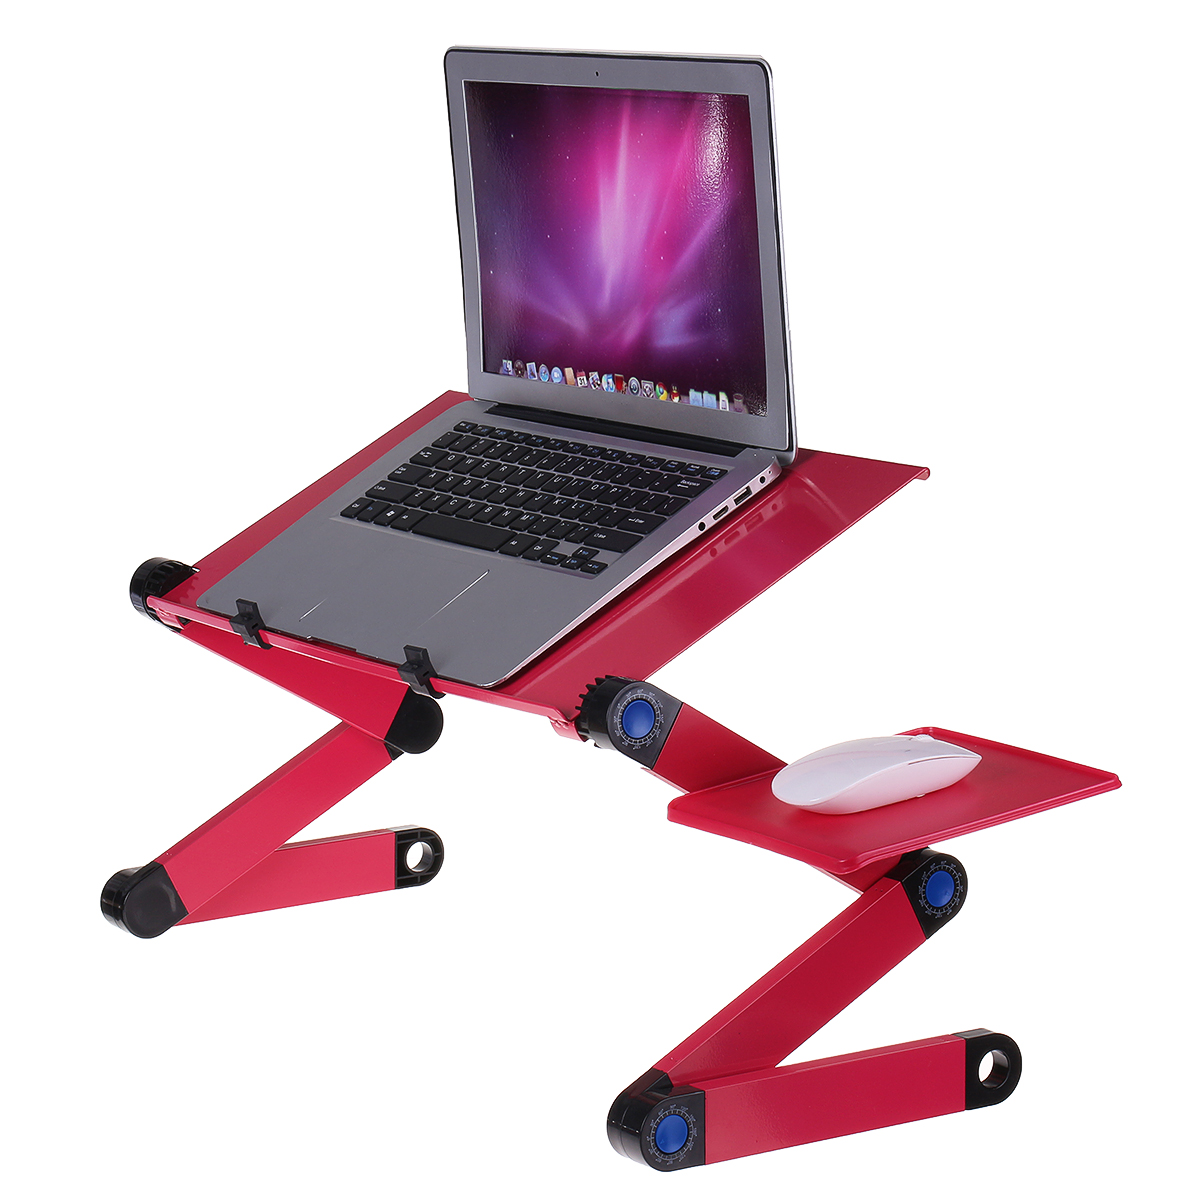 Cooling-Laptop-Desk-360-Degree-Aluminum-Alloy-Adjustable-Foldable-Cooling-Notebook-Table-for-Sofa-Be-1786133-16